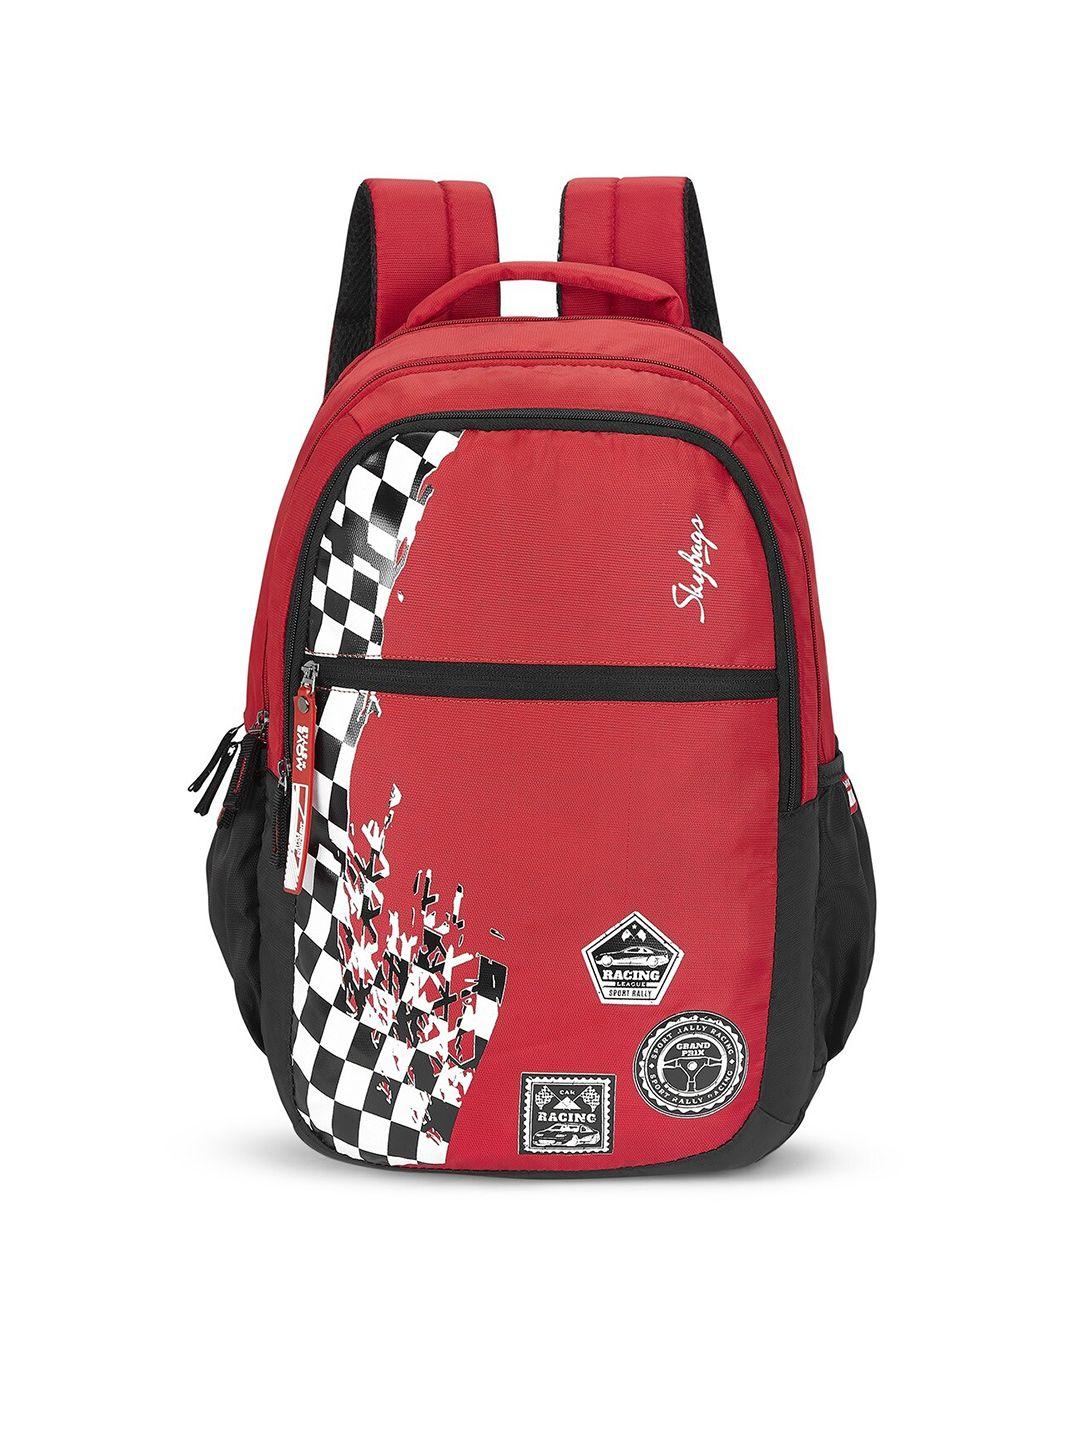 Skybags Unisex Red & White Graphic Backpack